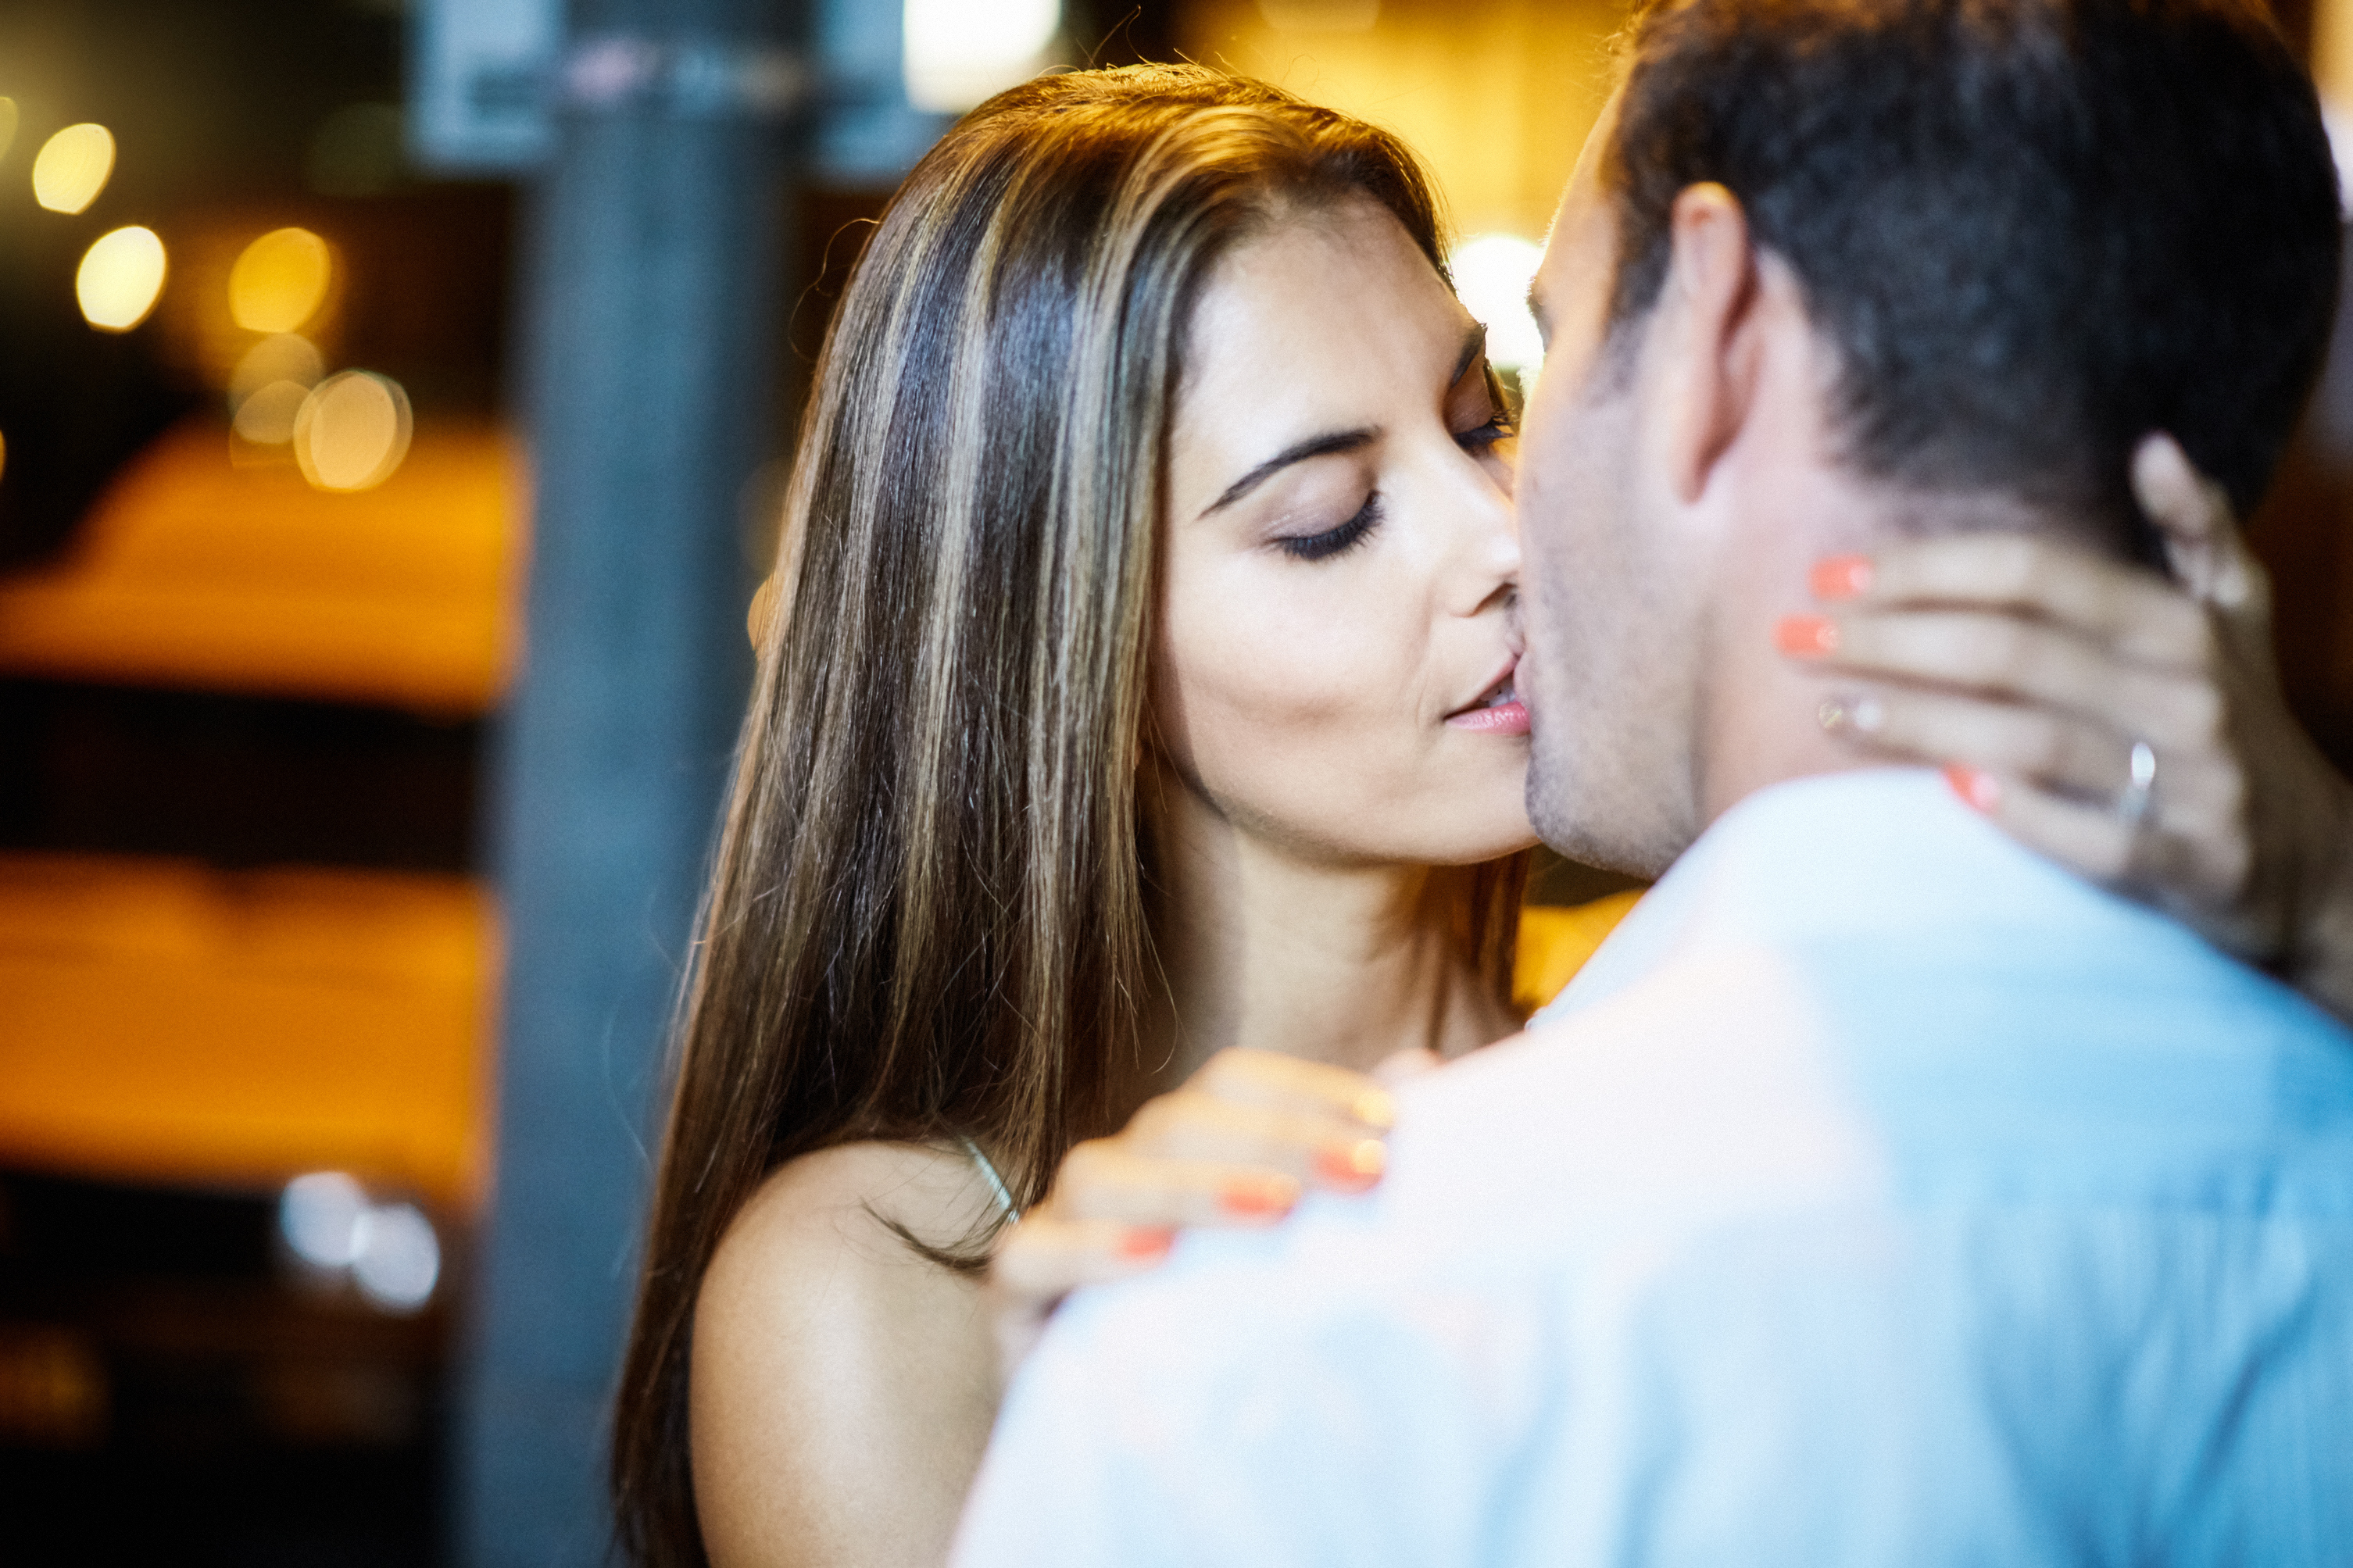 When You Meet A Beautiful Woman, When Would Be The Right Time To Kiss Her?